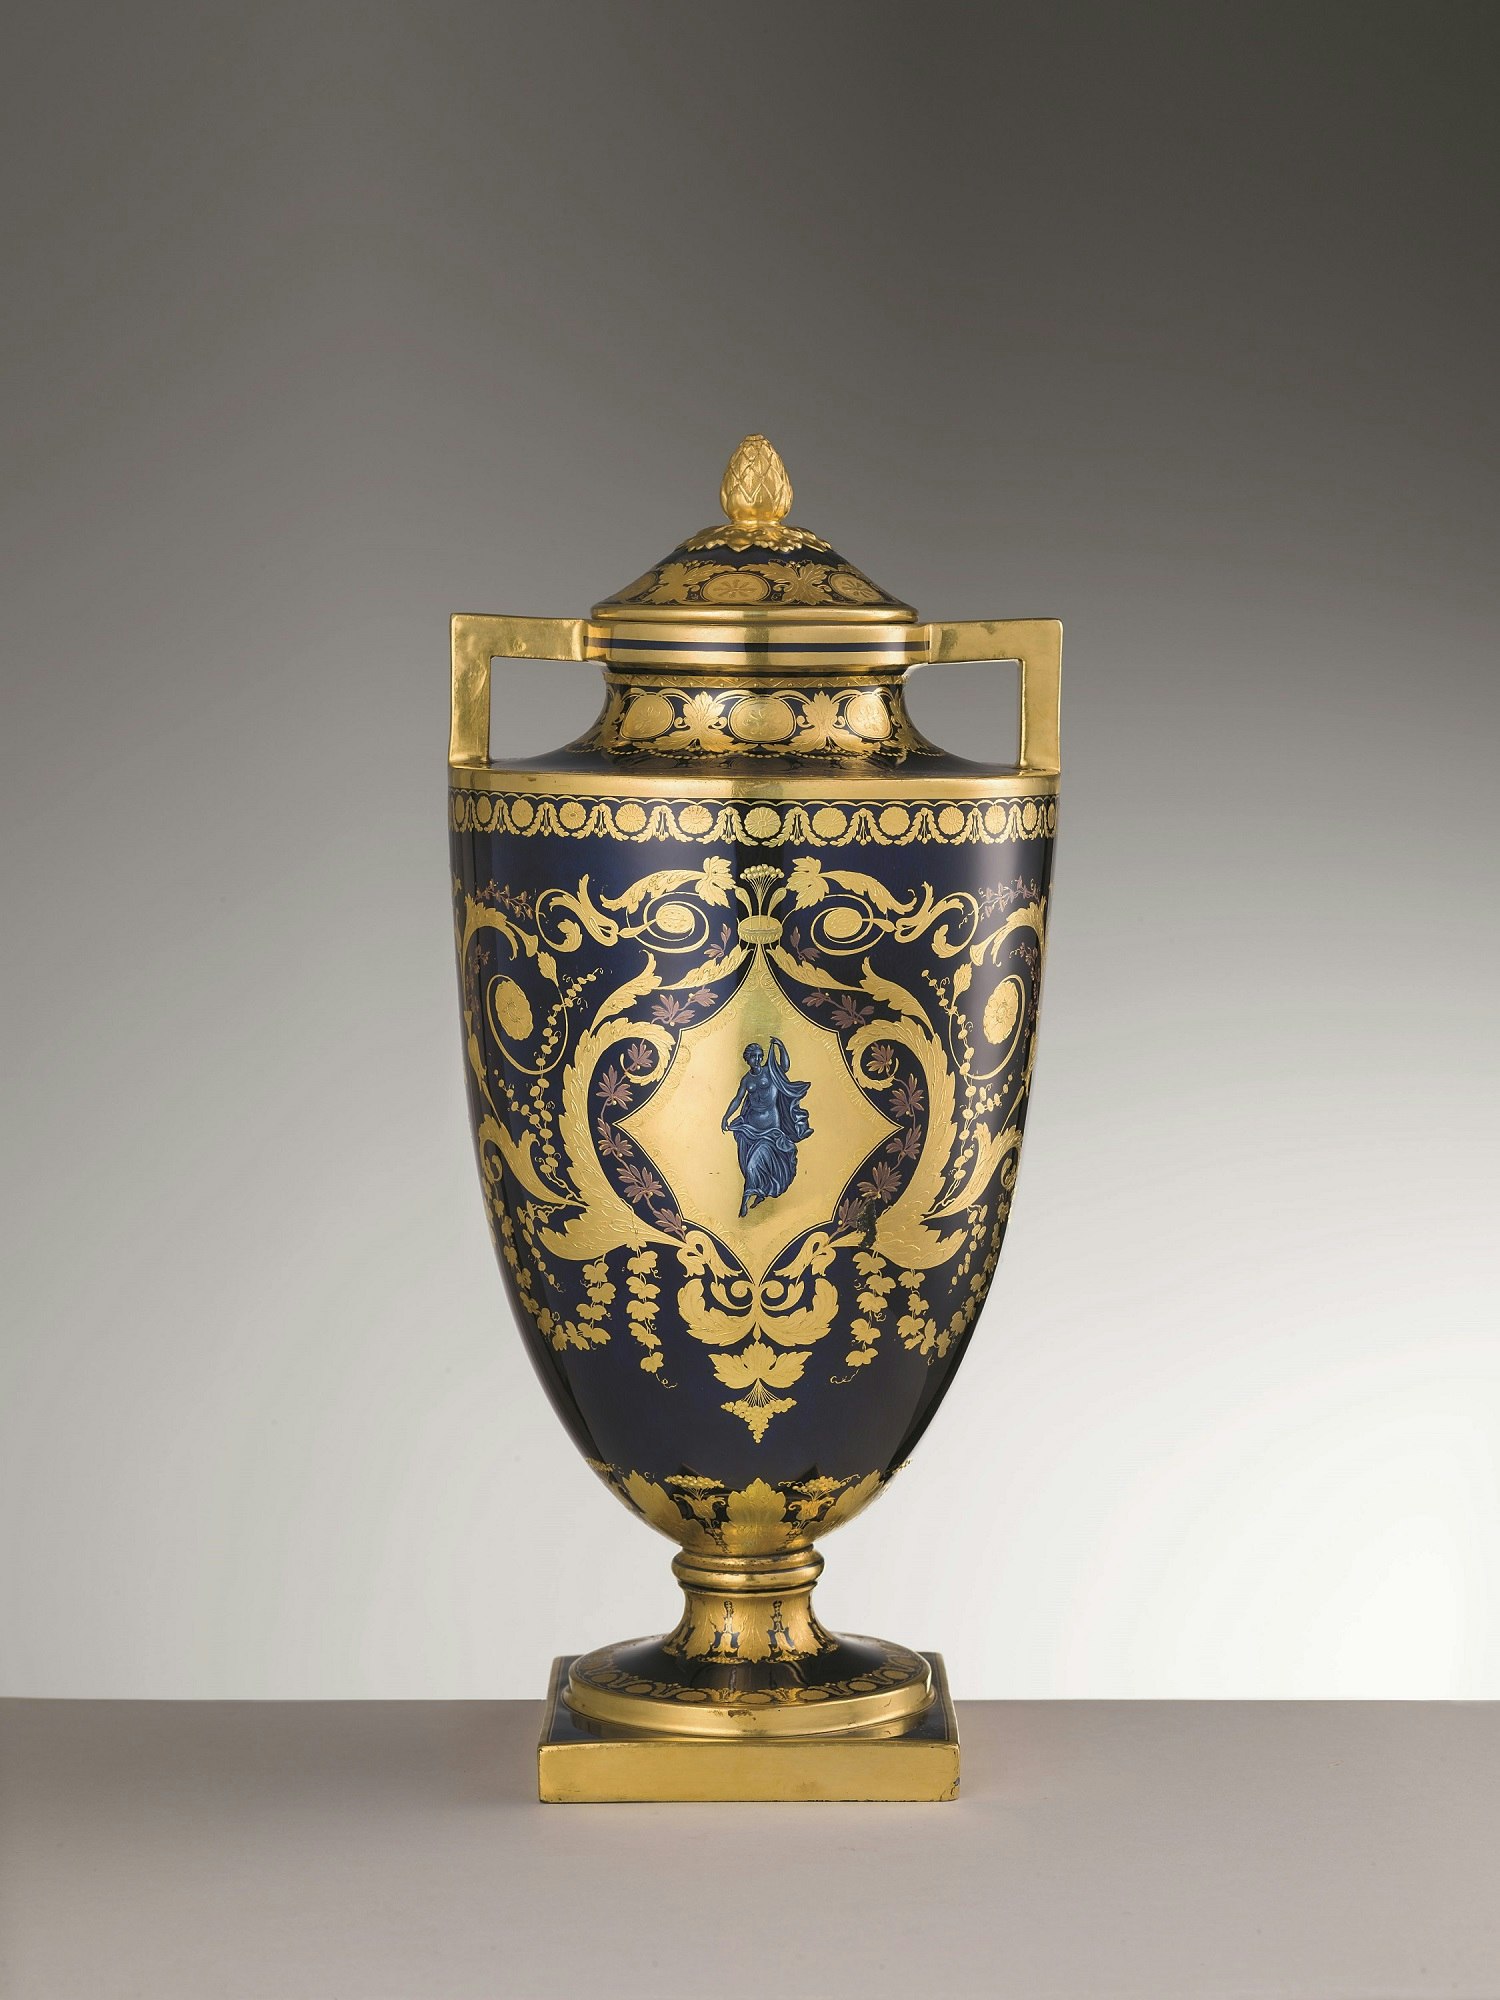 Two-handled vase with lid